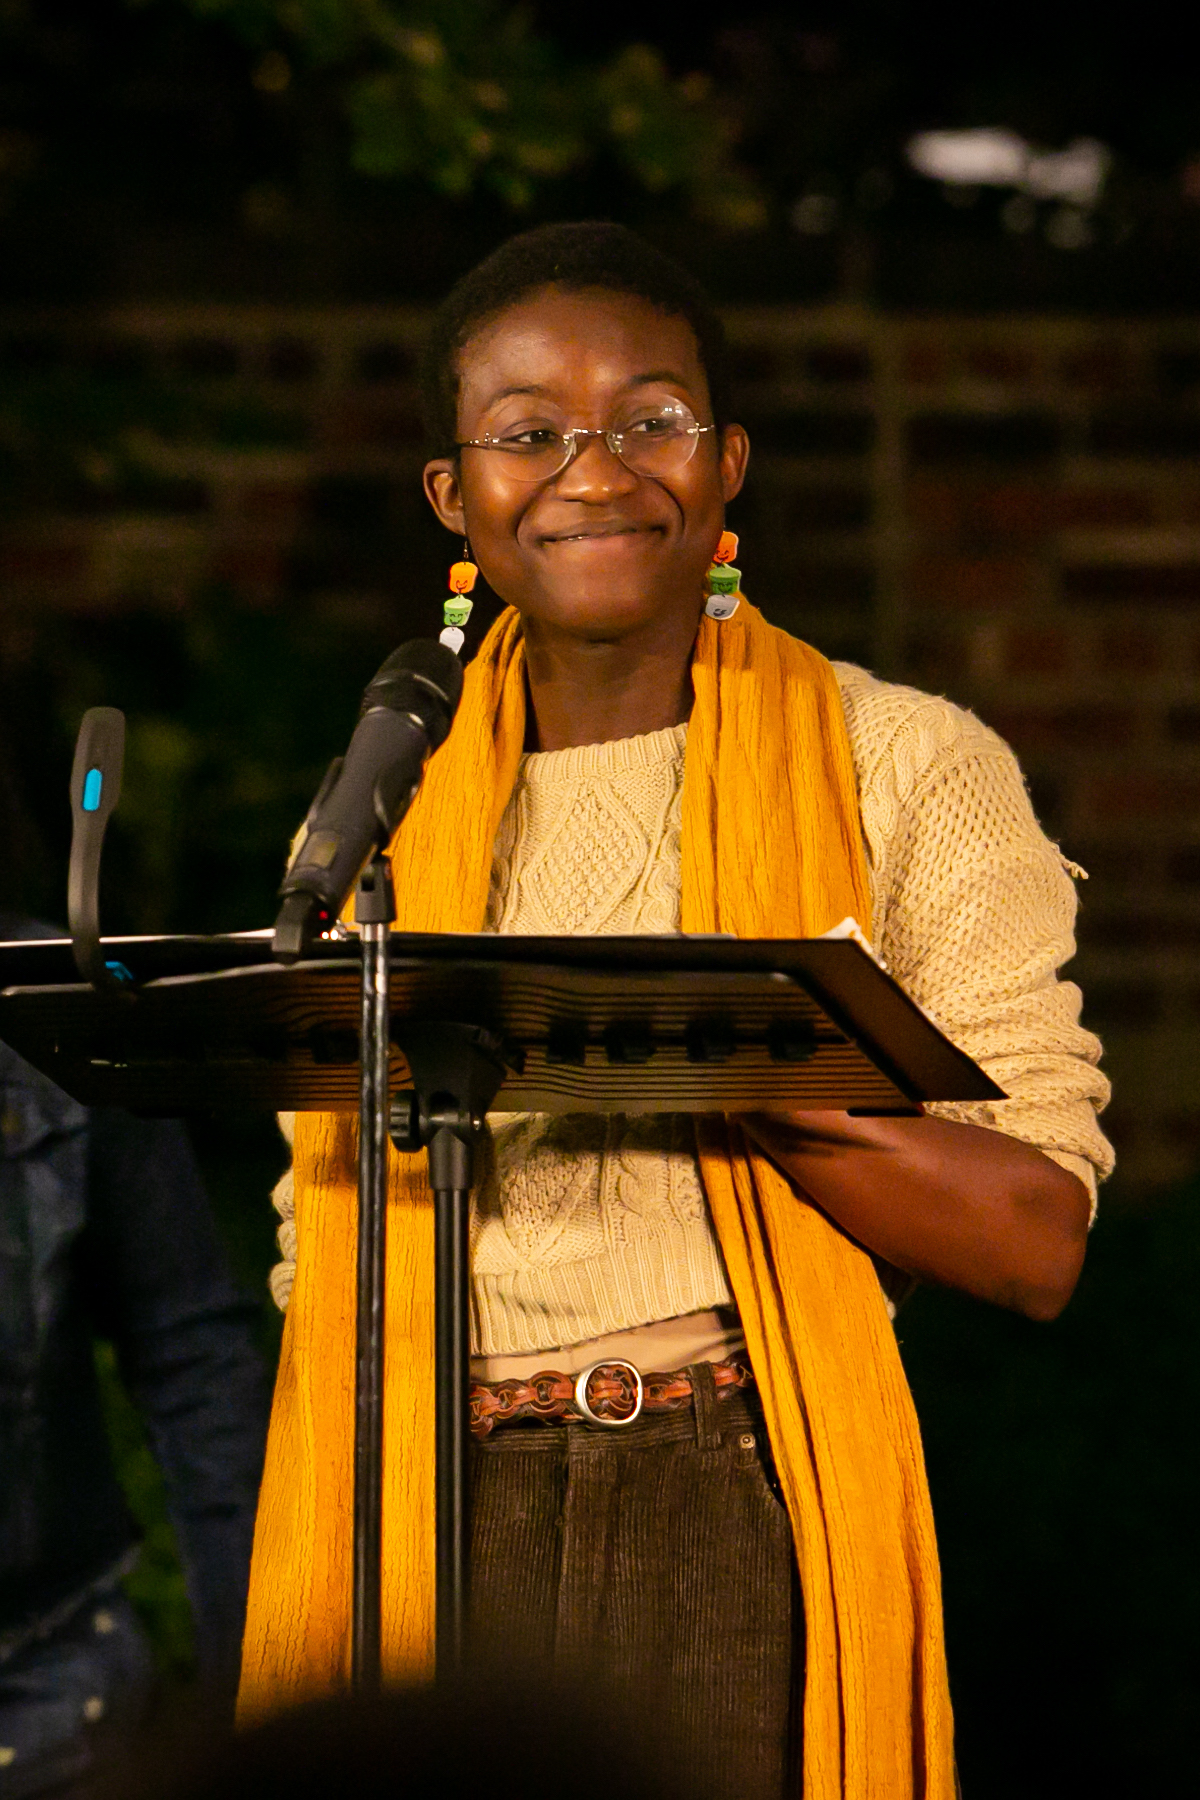 A performer in a yellow sweater and scarf stands adn smiles at a music stand